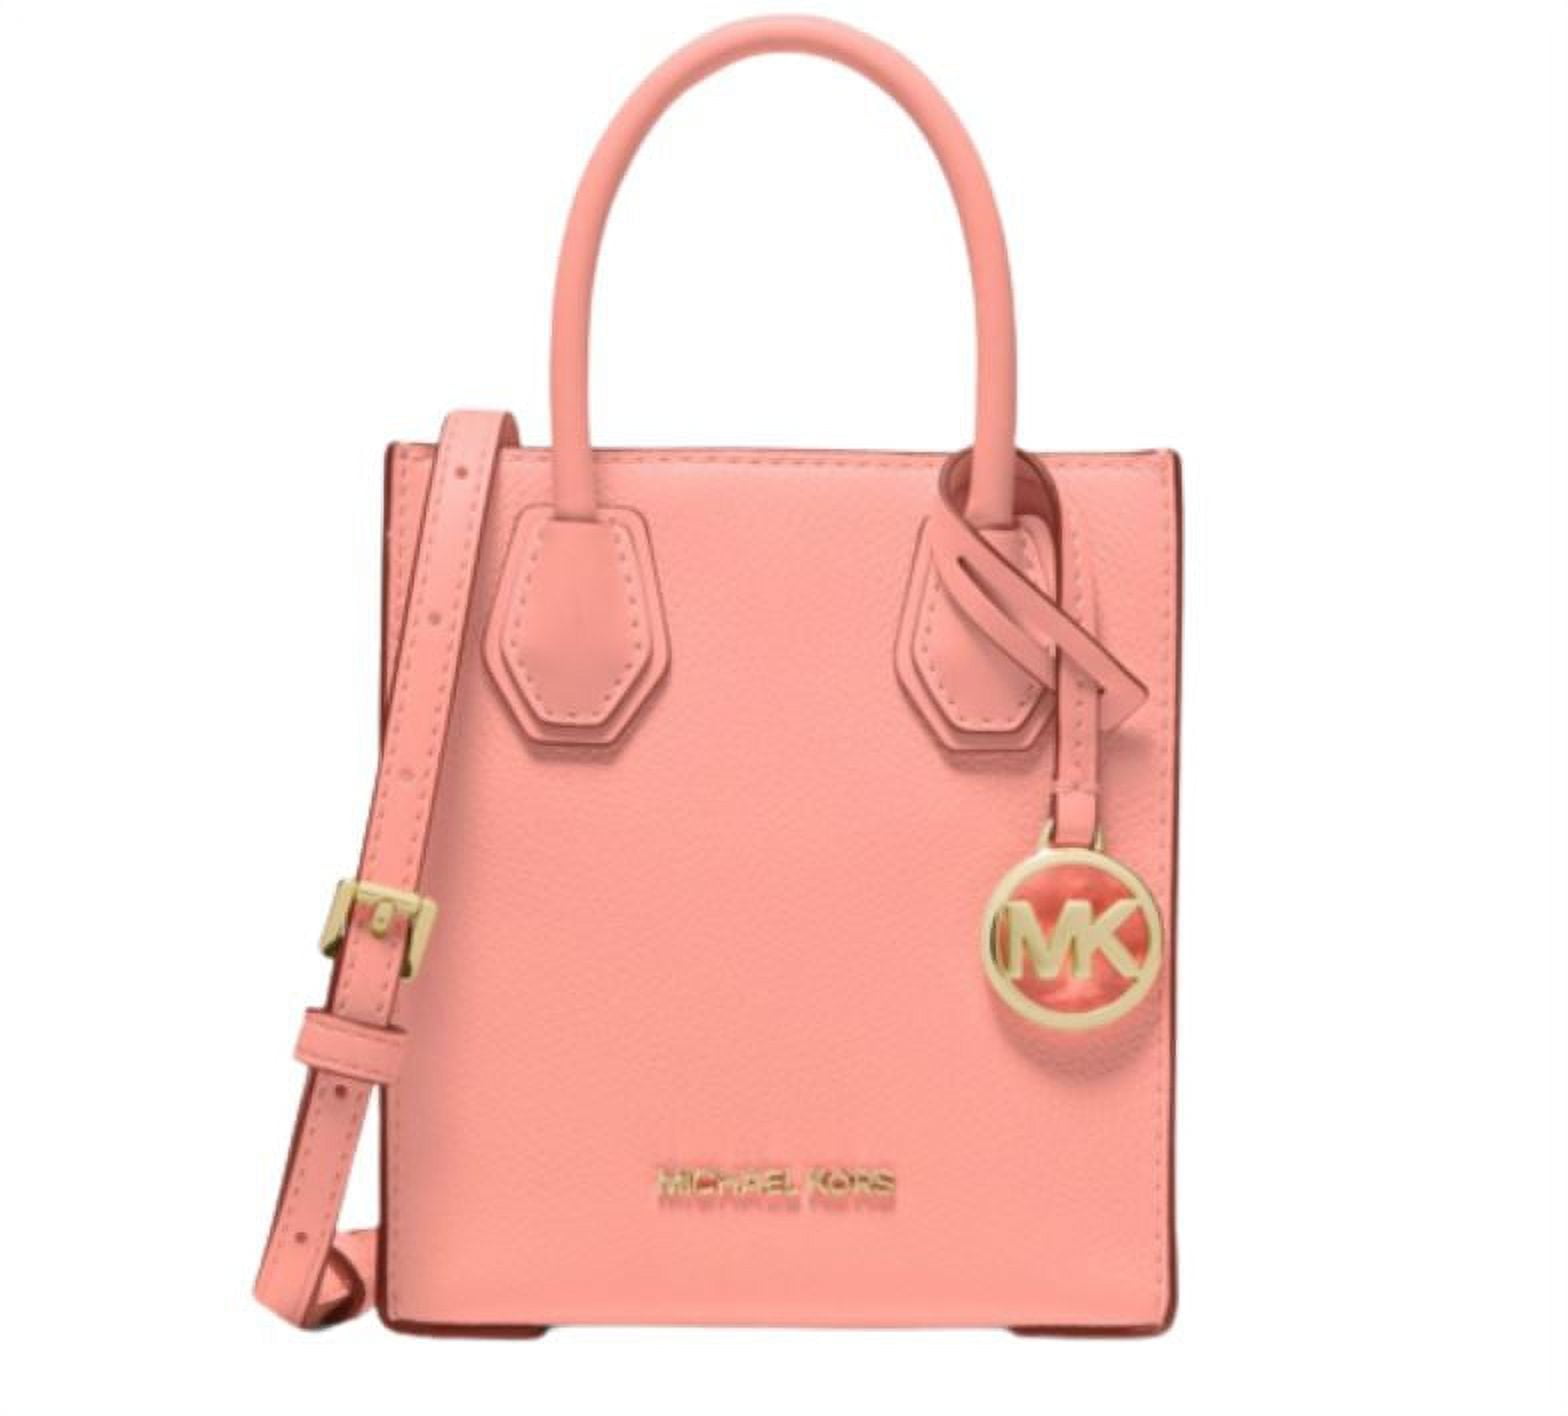 Michael Kors Mercer Leather Chain Accented Tote Bag 